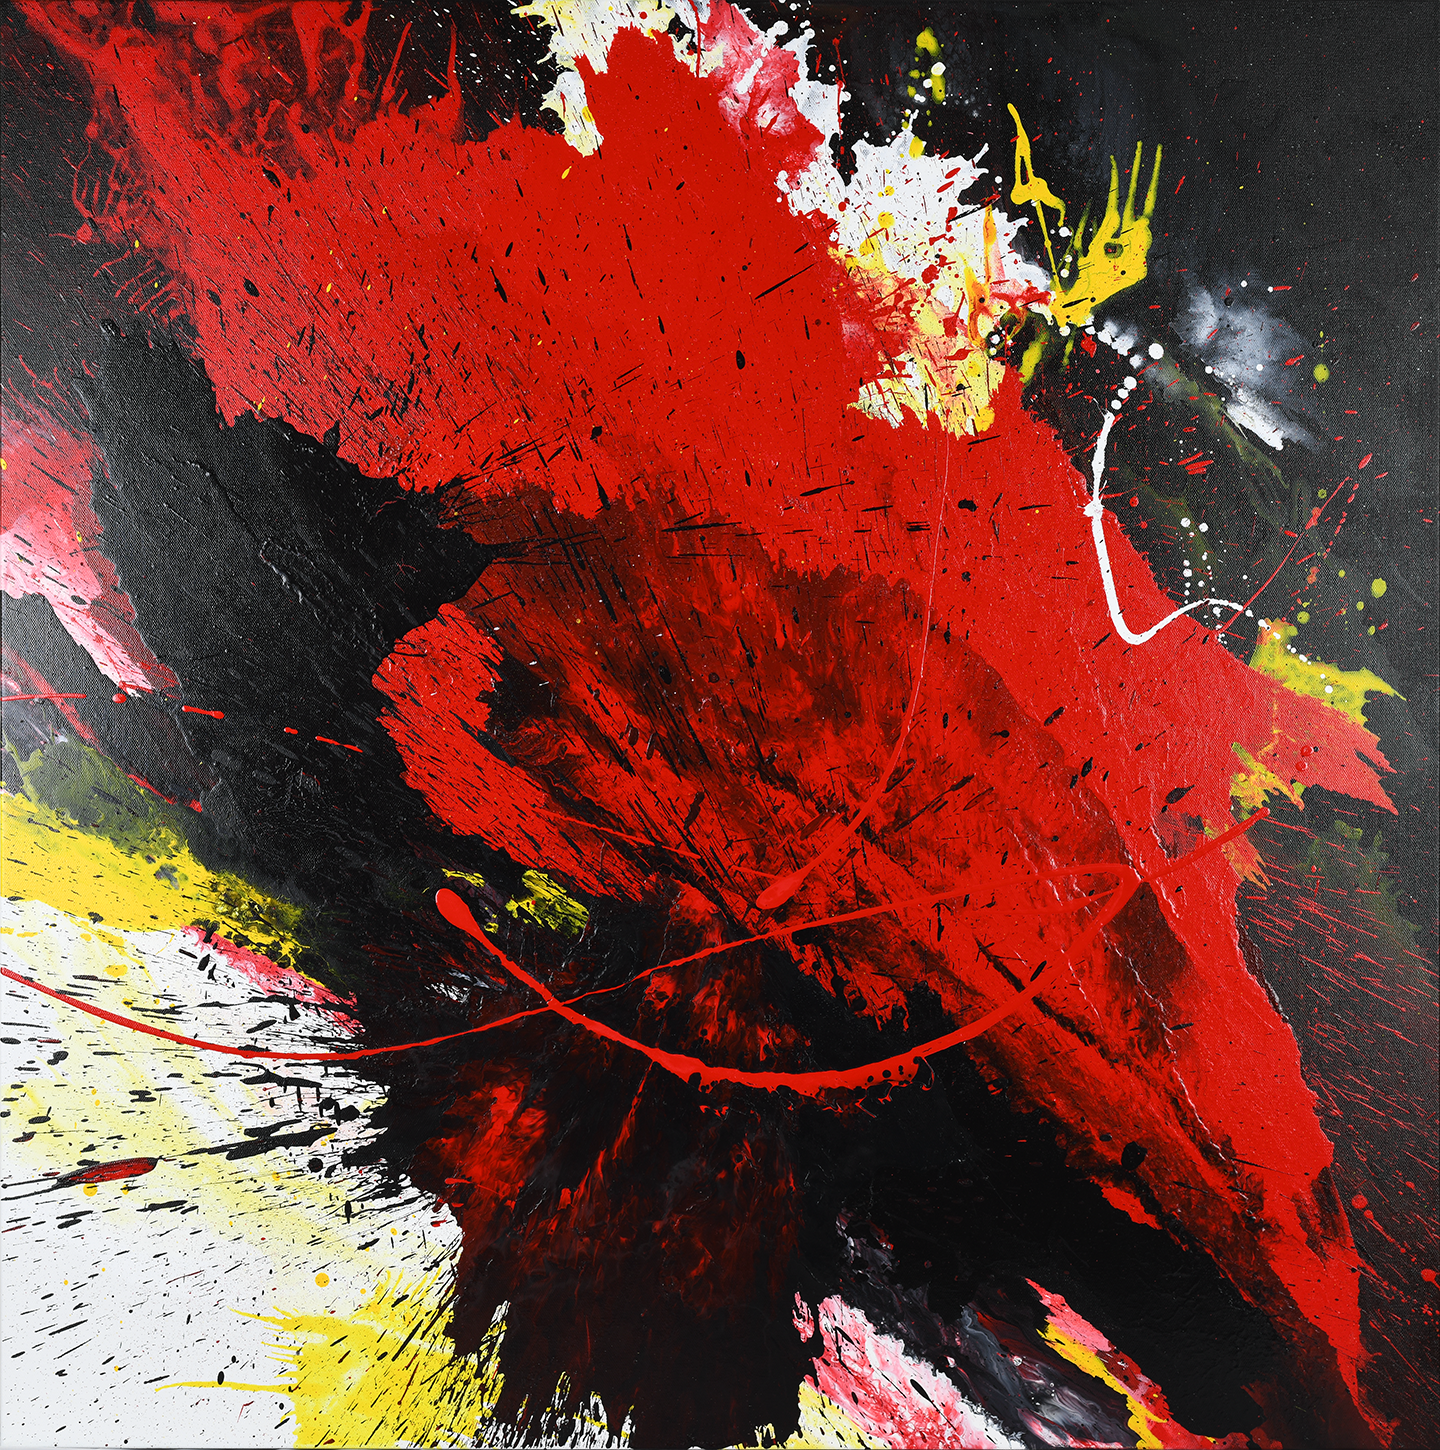 Full view of the abstract, expressionism, acrylic 36” original painting or print: tumultuous explosion of bright red, black, yellow and white on a Gallery-Wrapped canvas